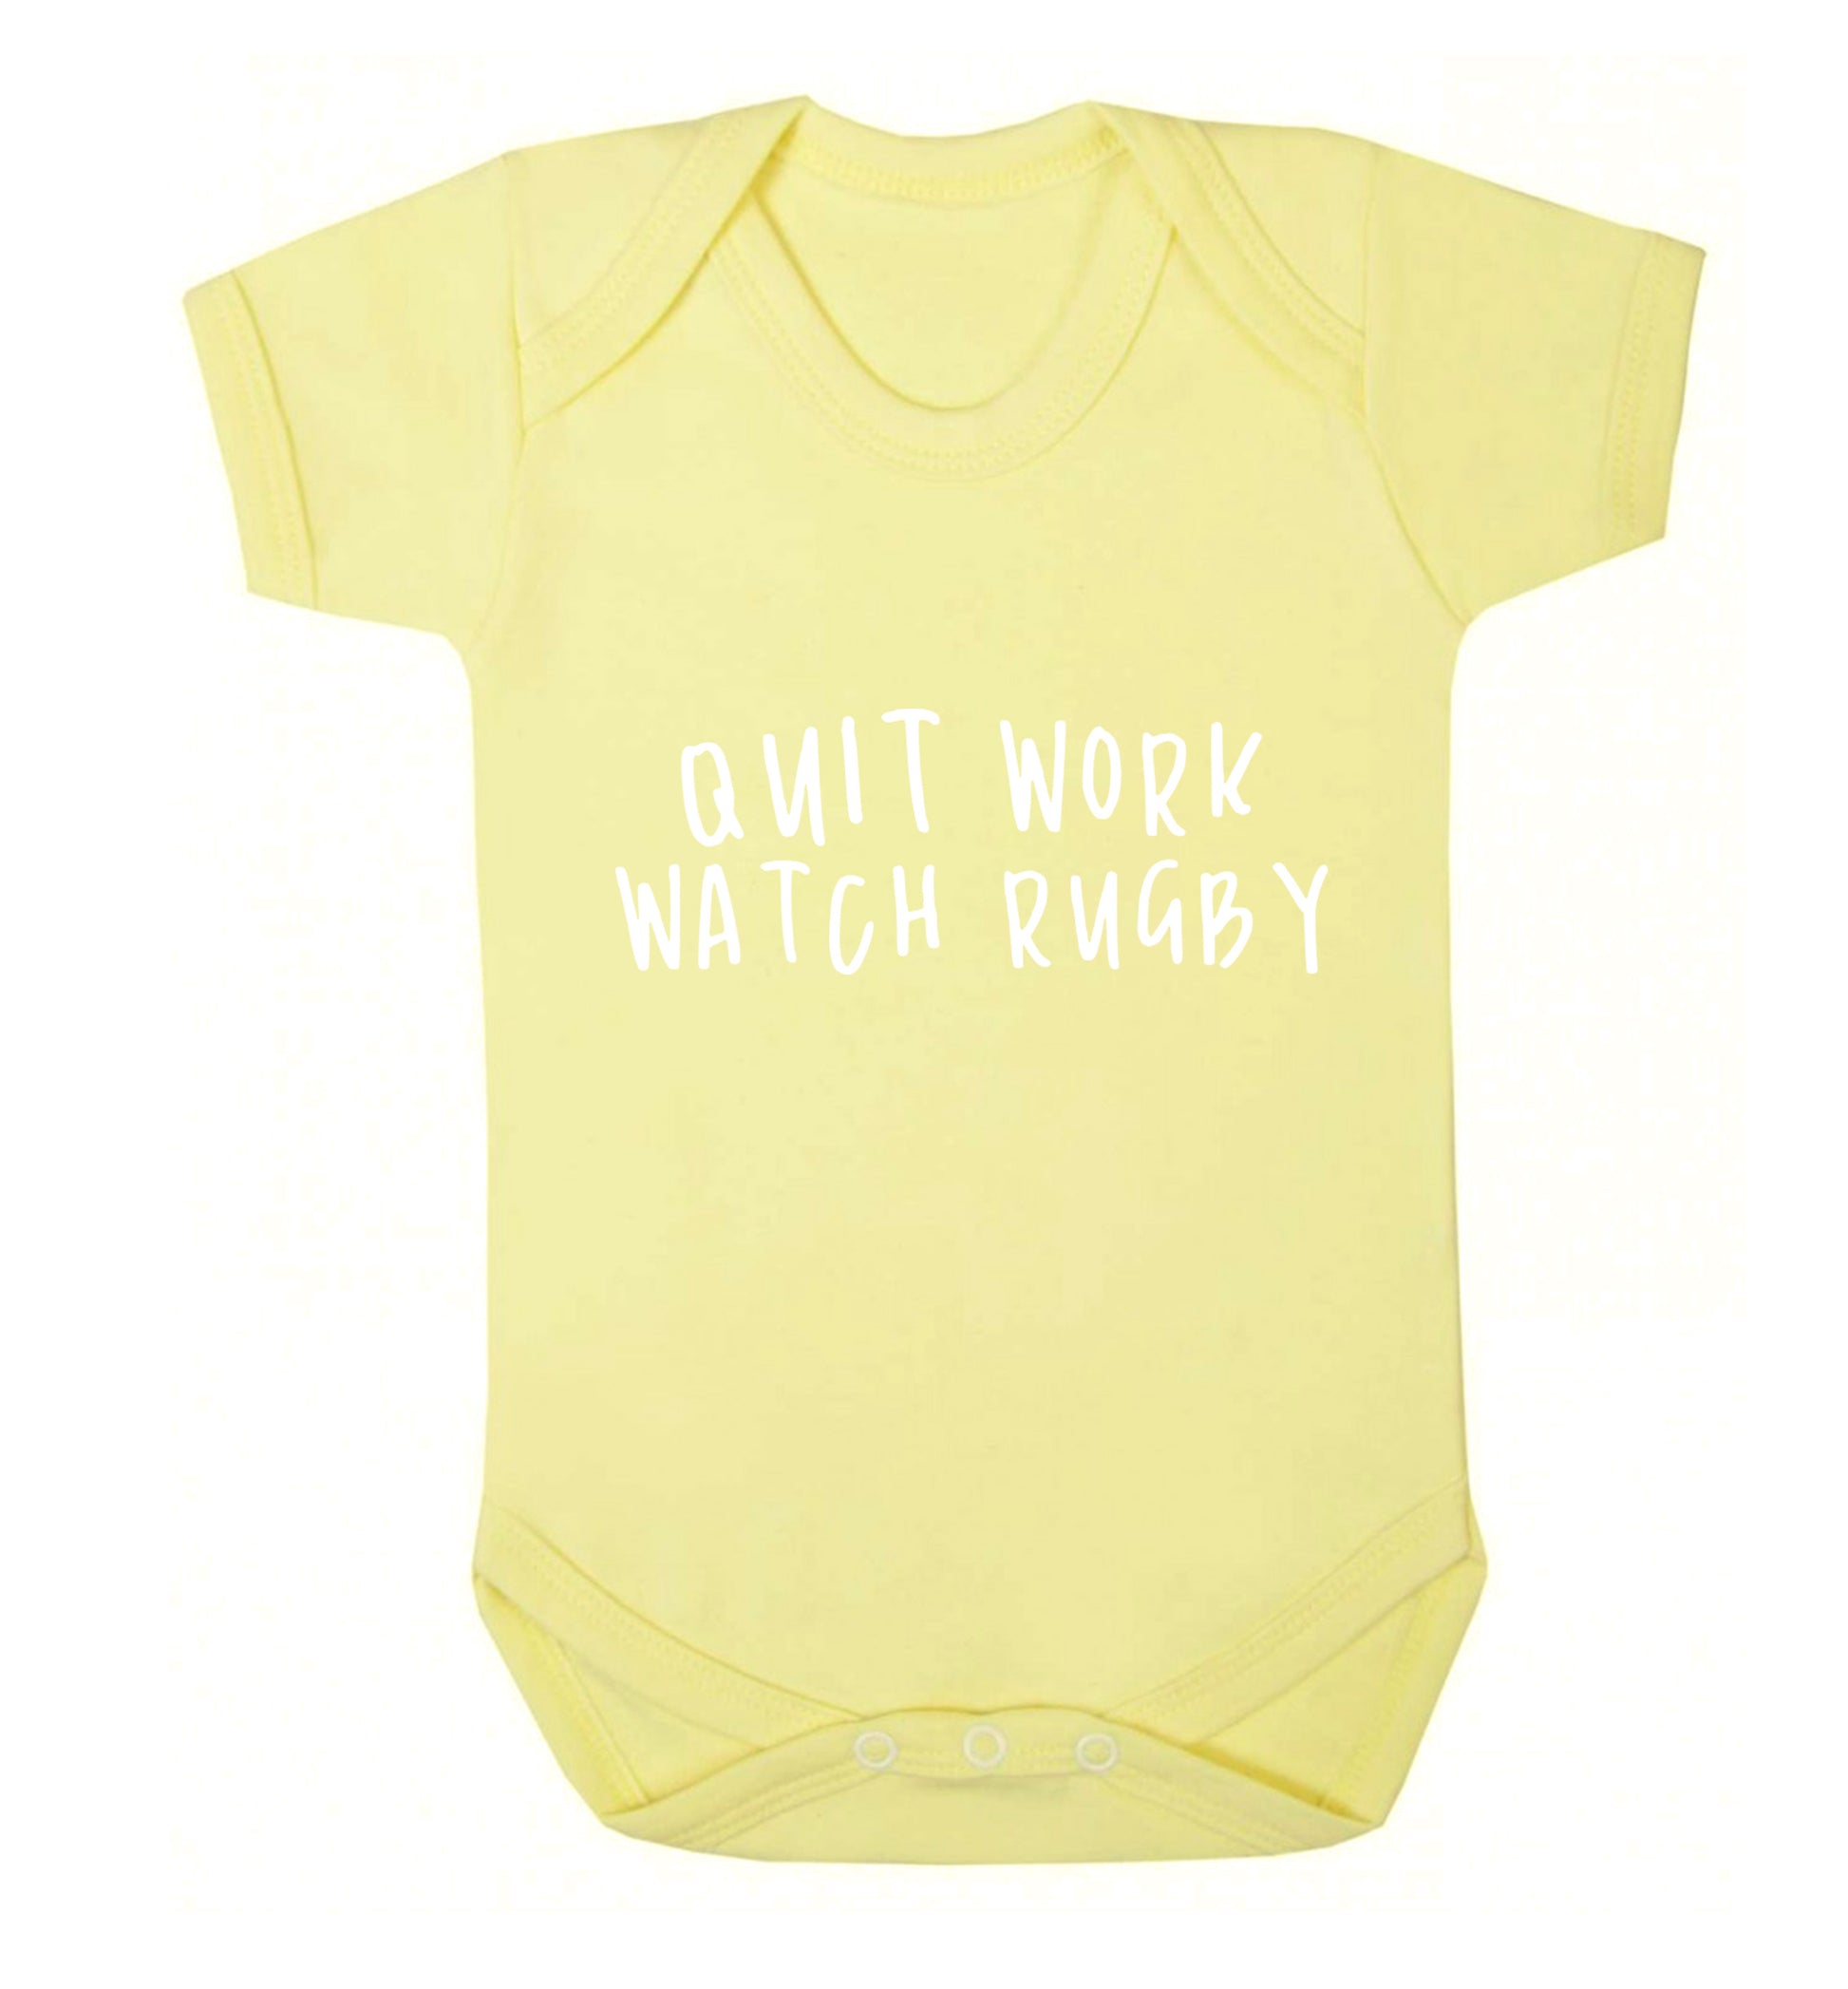 Quit work watch rugby Baby Vest pale yellow 18-24 months